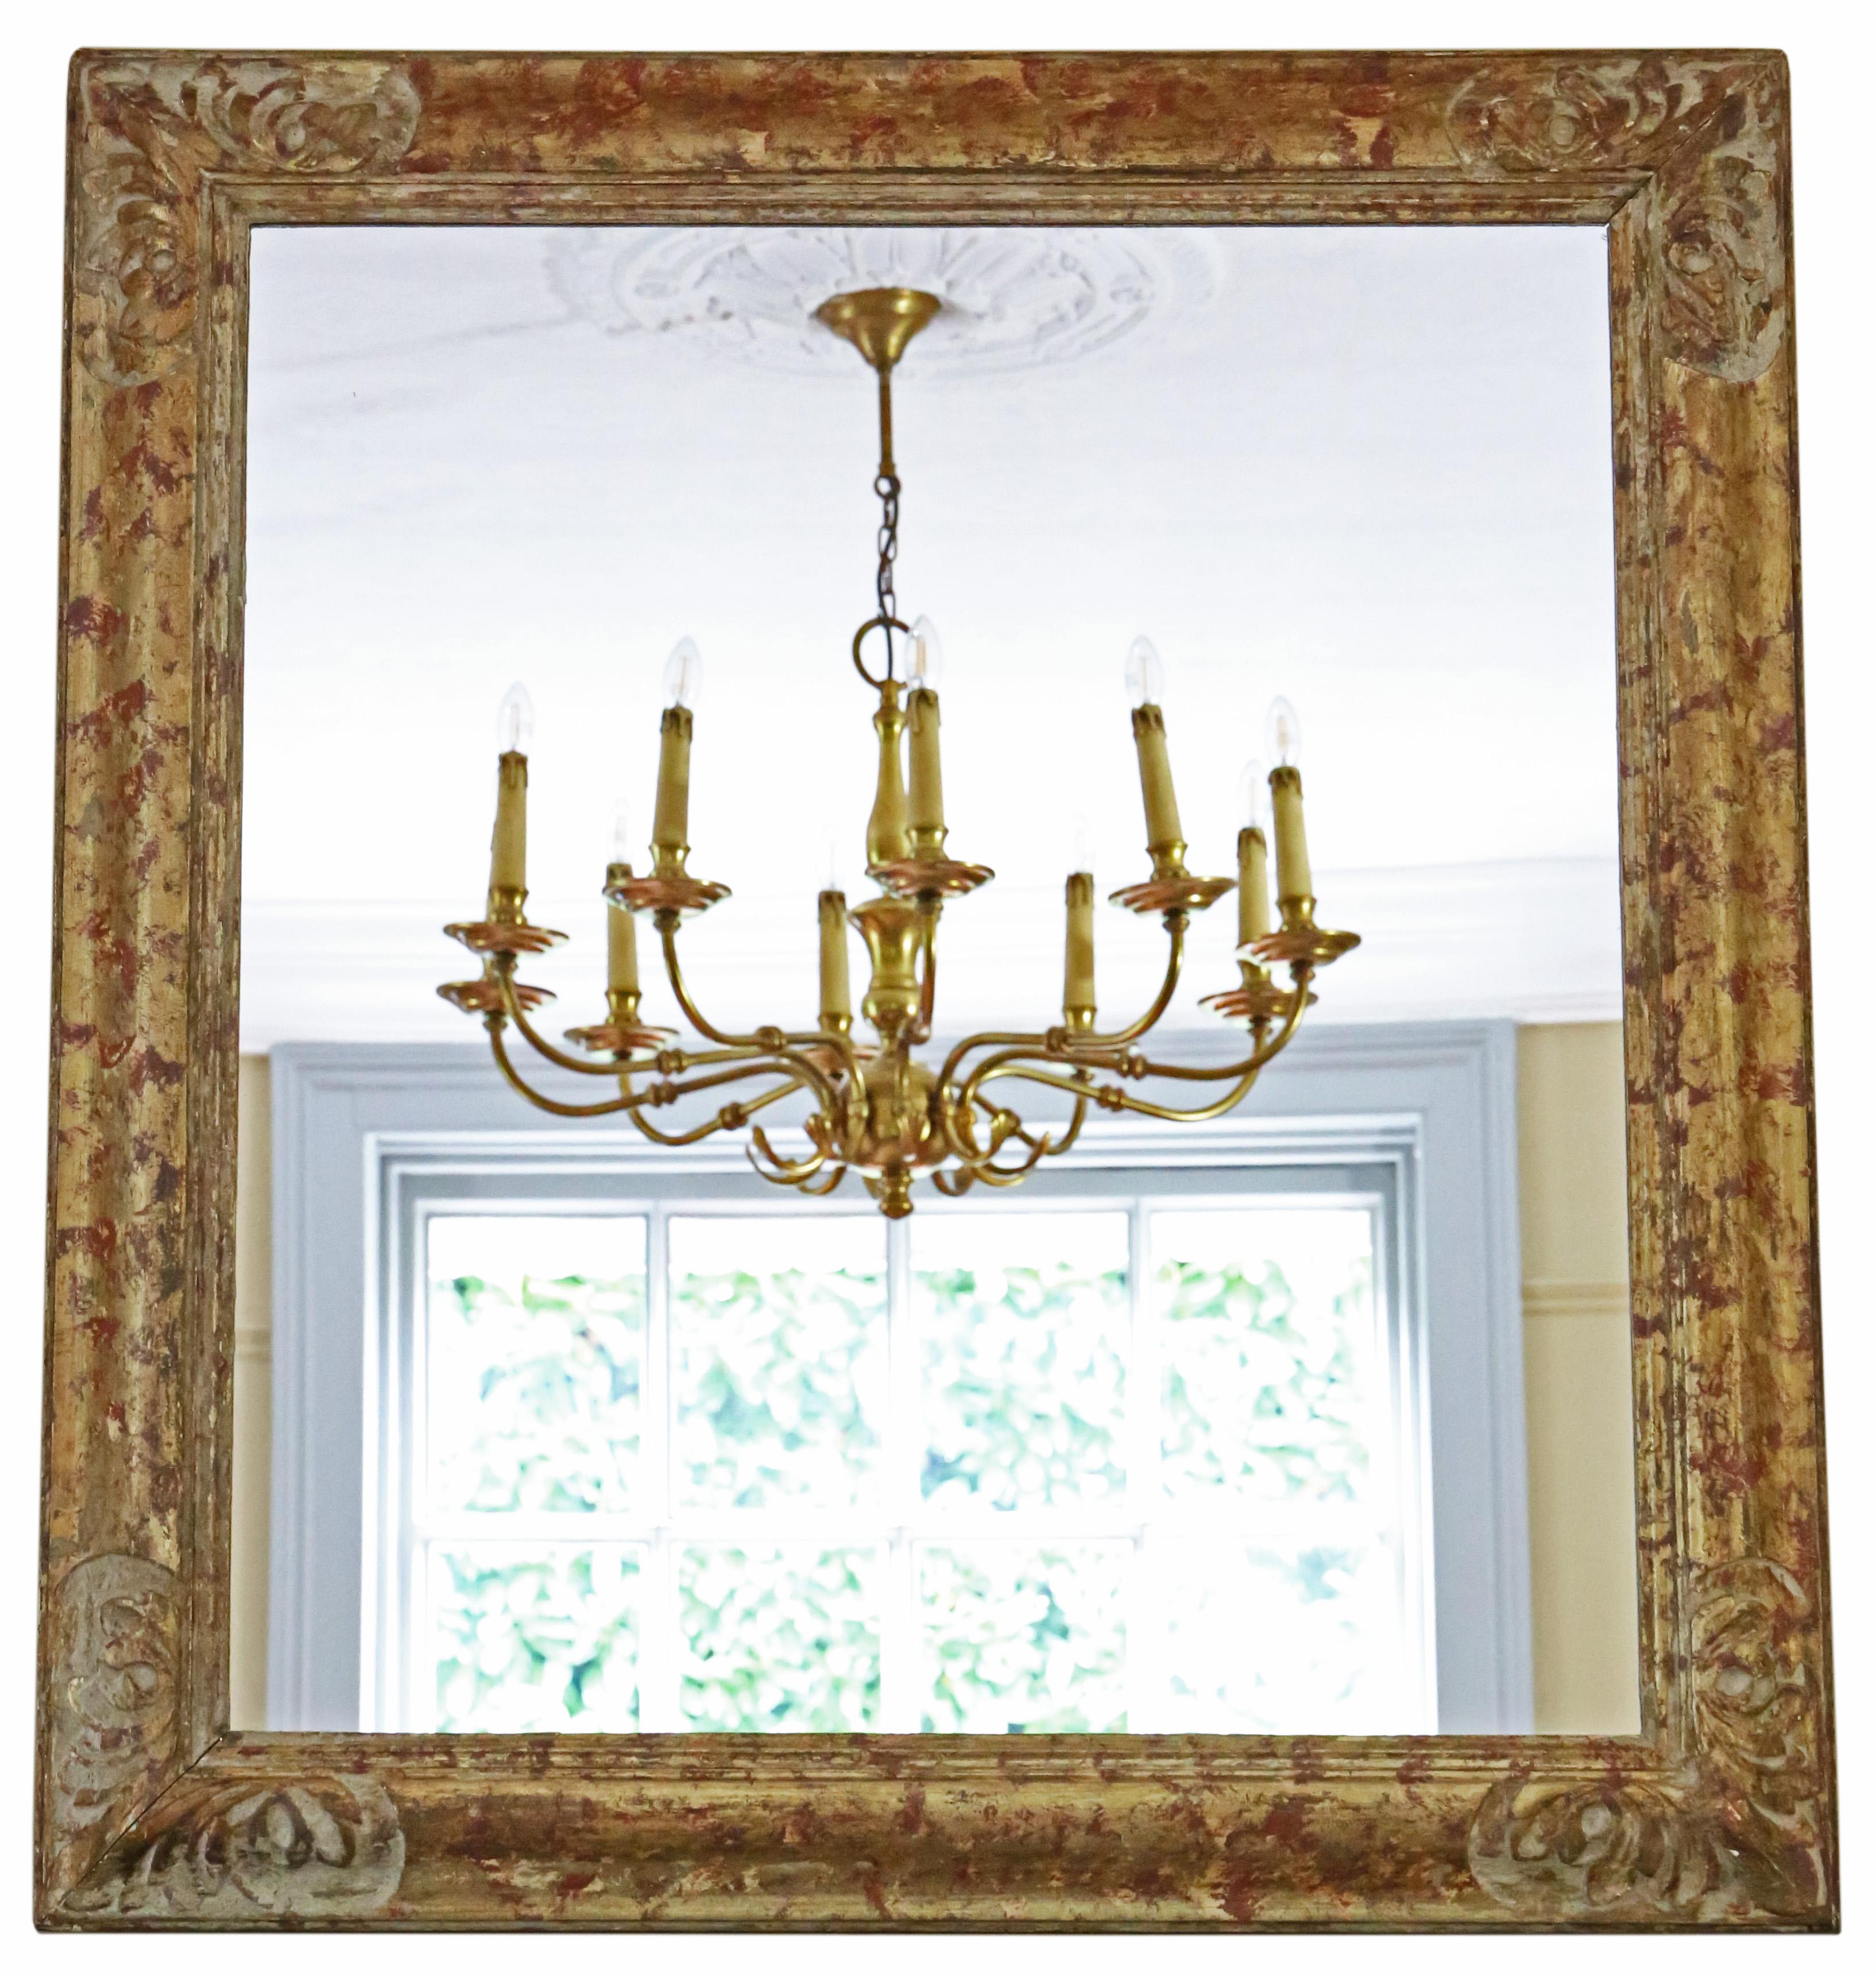 Antique large C1920 quality gilt overmantle wall mirror. Lovely charm and elegance.

This is a lovely, rare mirror. A bit different and quite special.

An impressive find, that would look amazing in the right location. No loose joints or